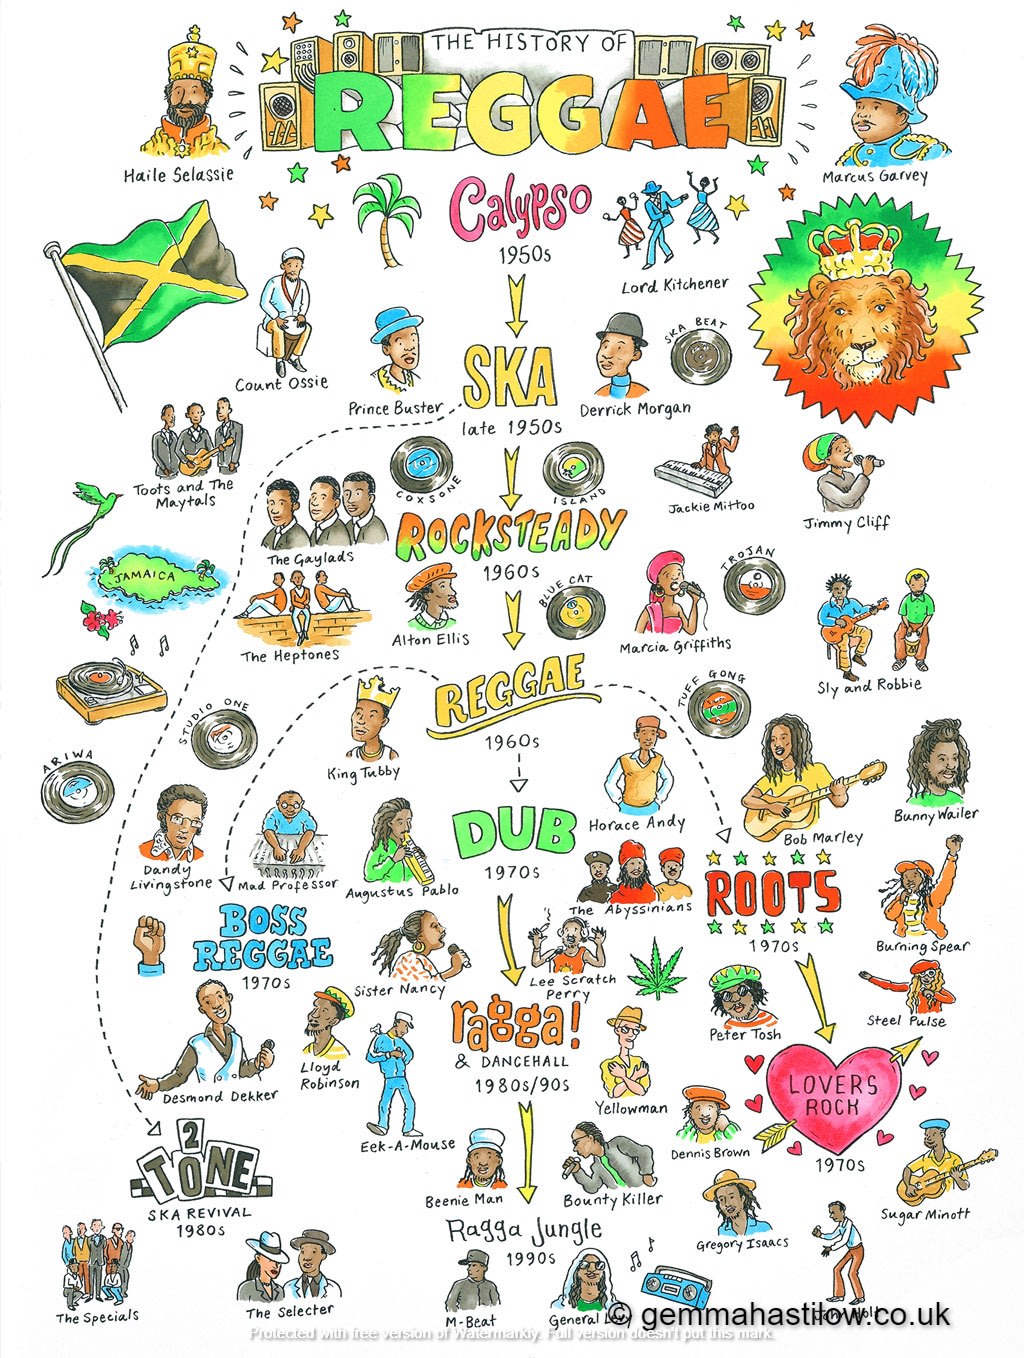 A friend of mine makes these cute music posters. Here's her history of reggae (from a UK perspective).